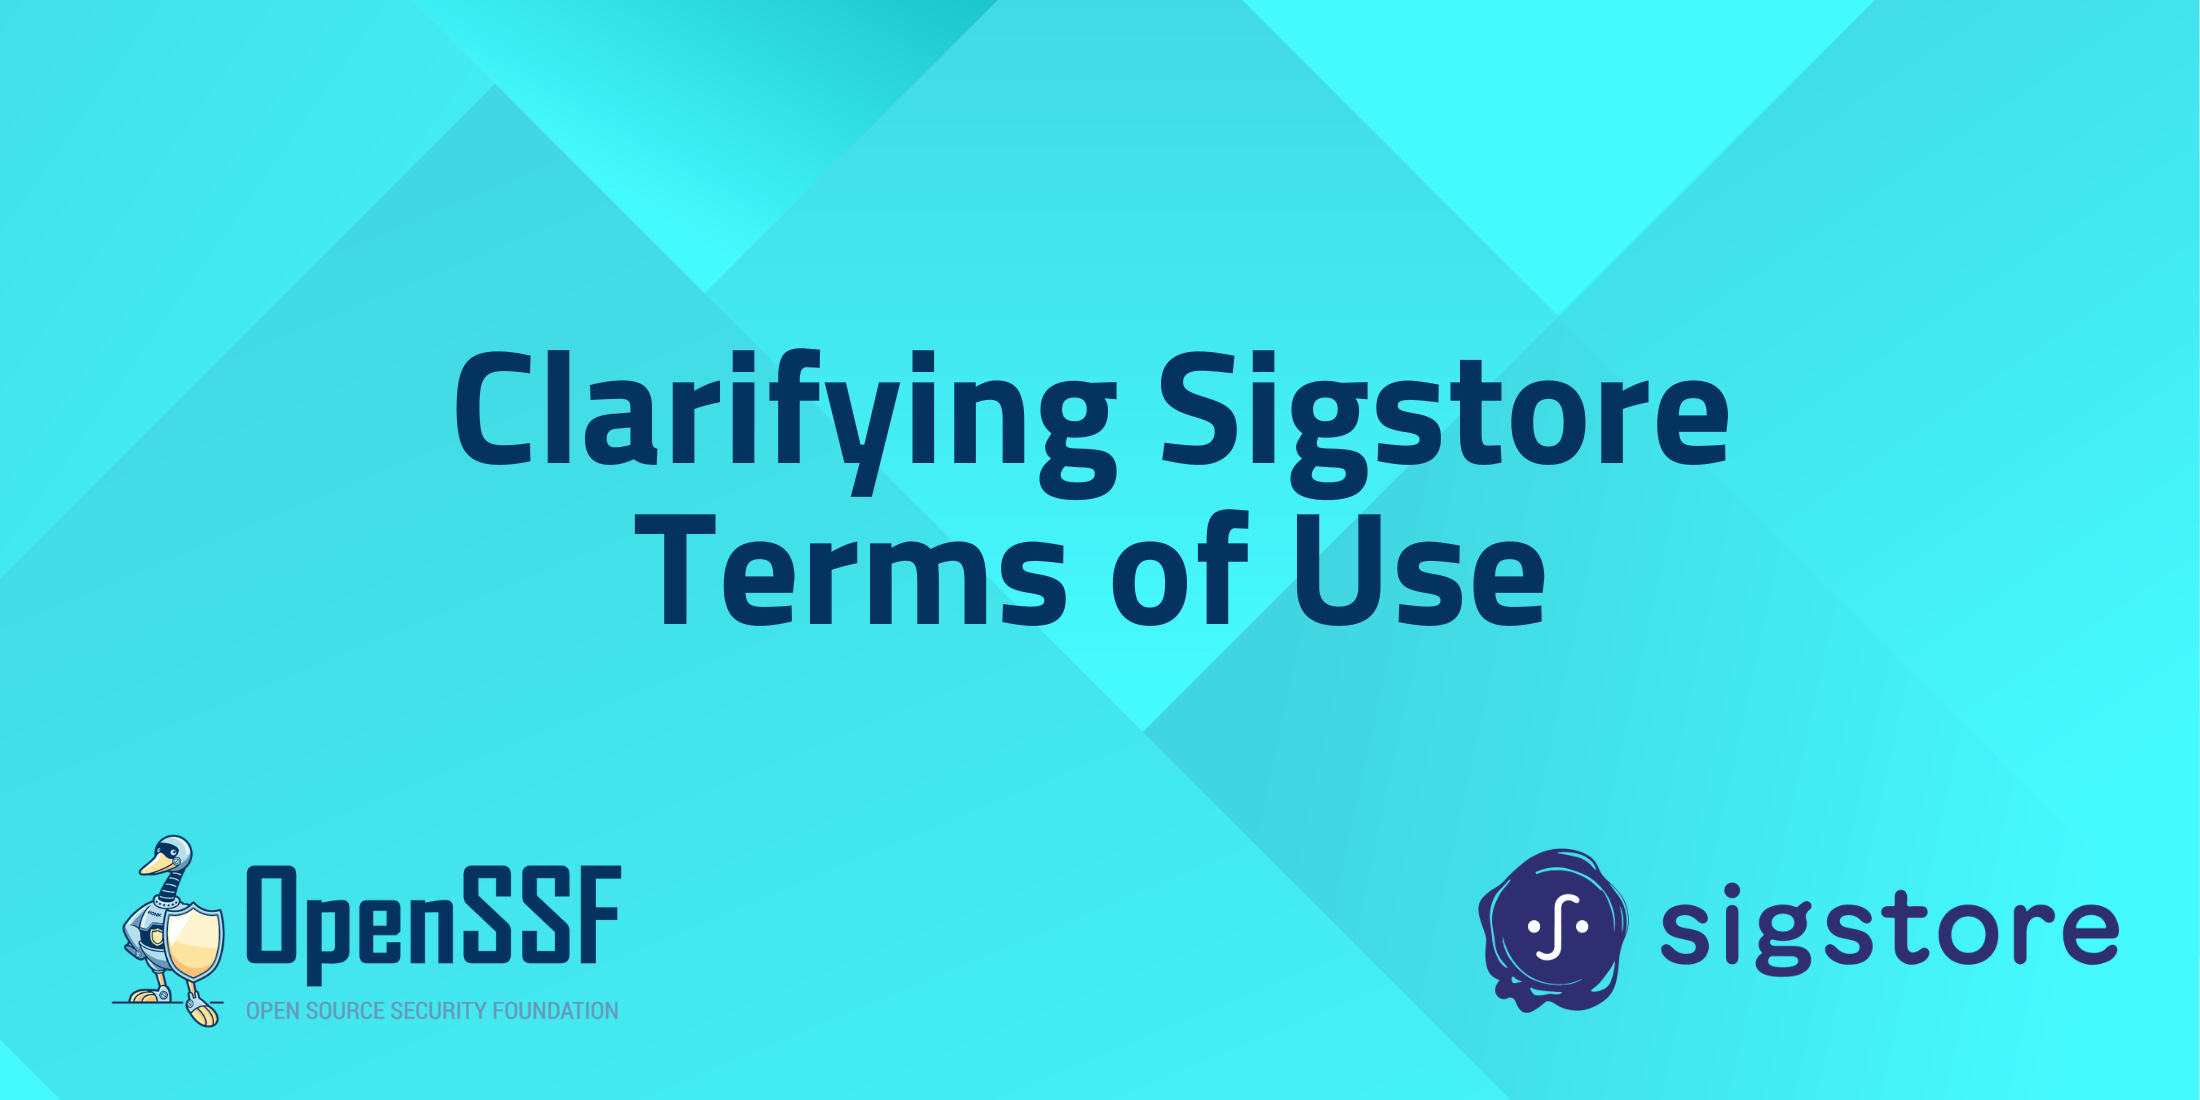 Clarifying Sigstore Terms of Use